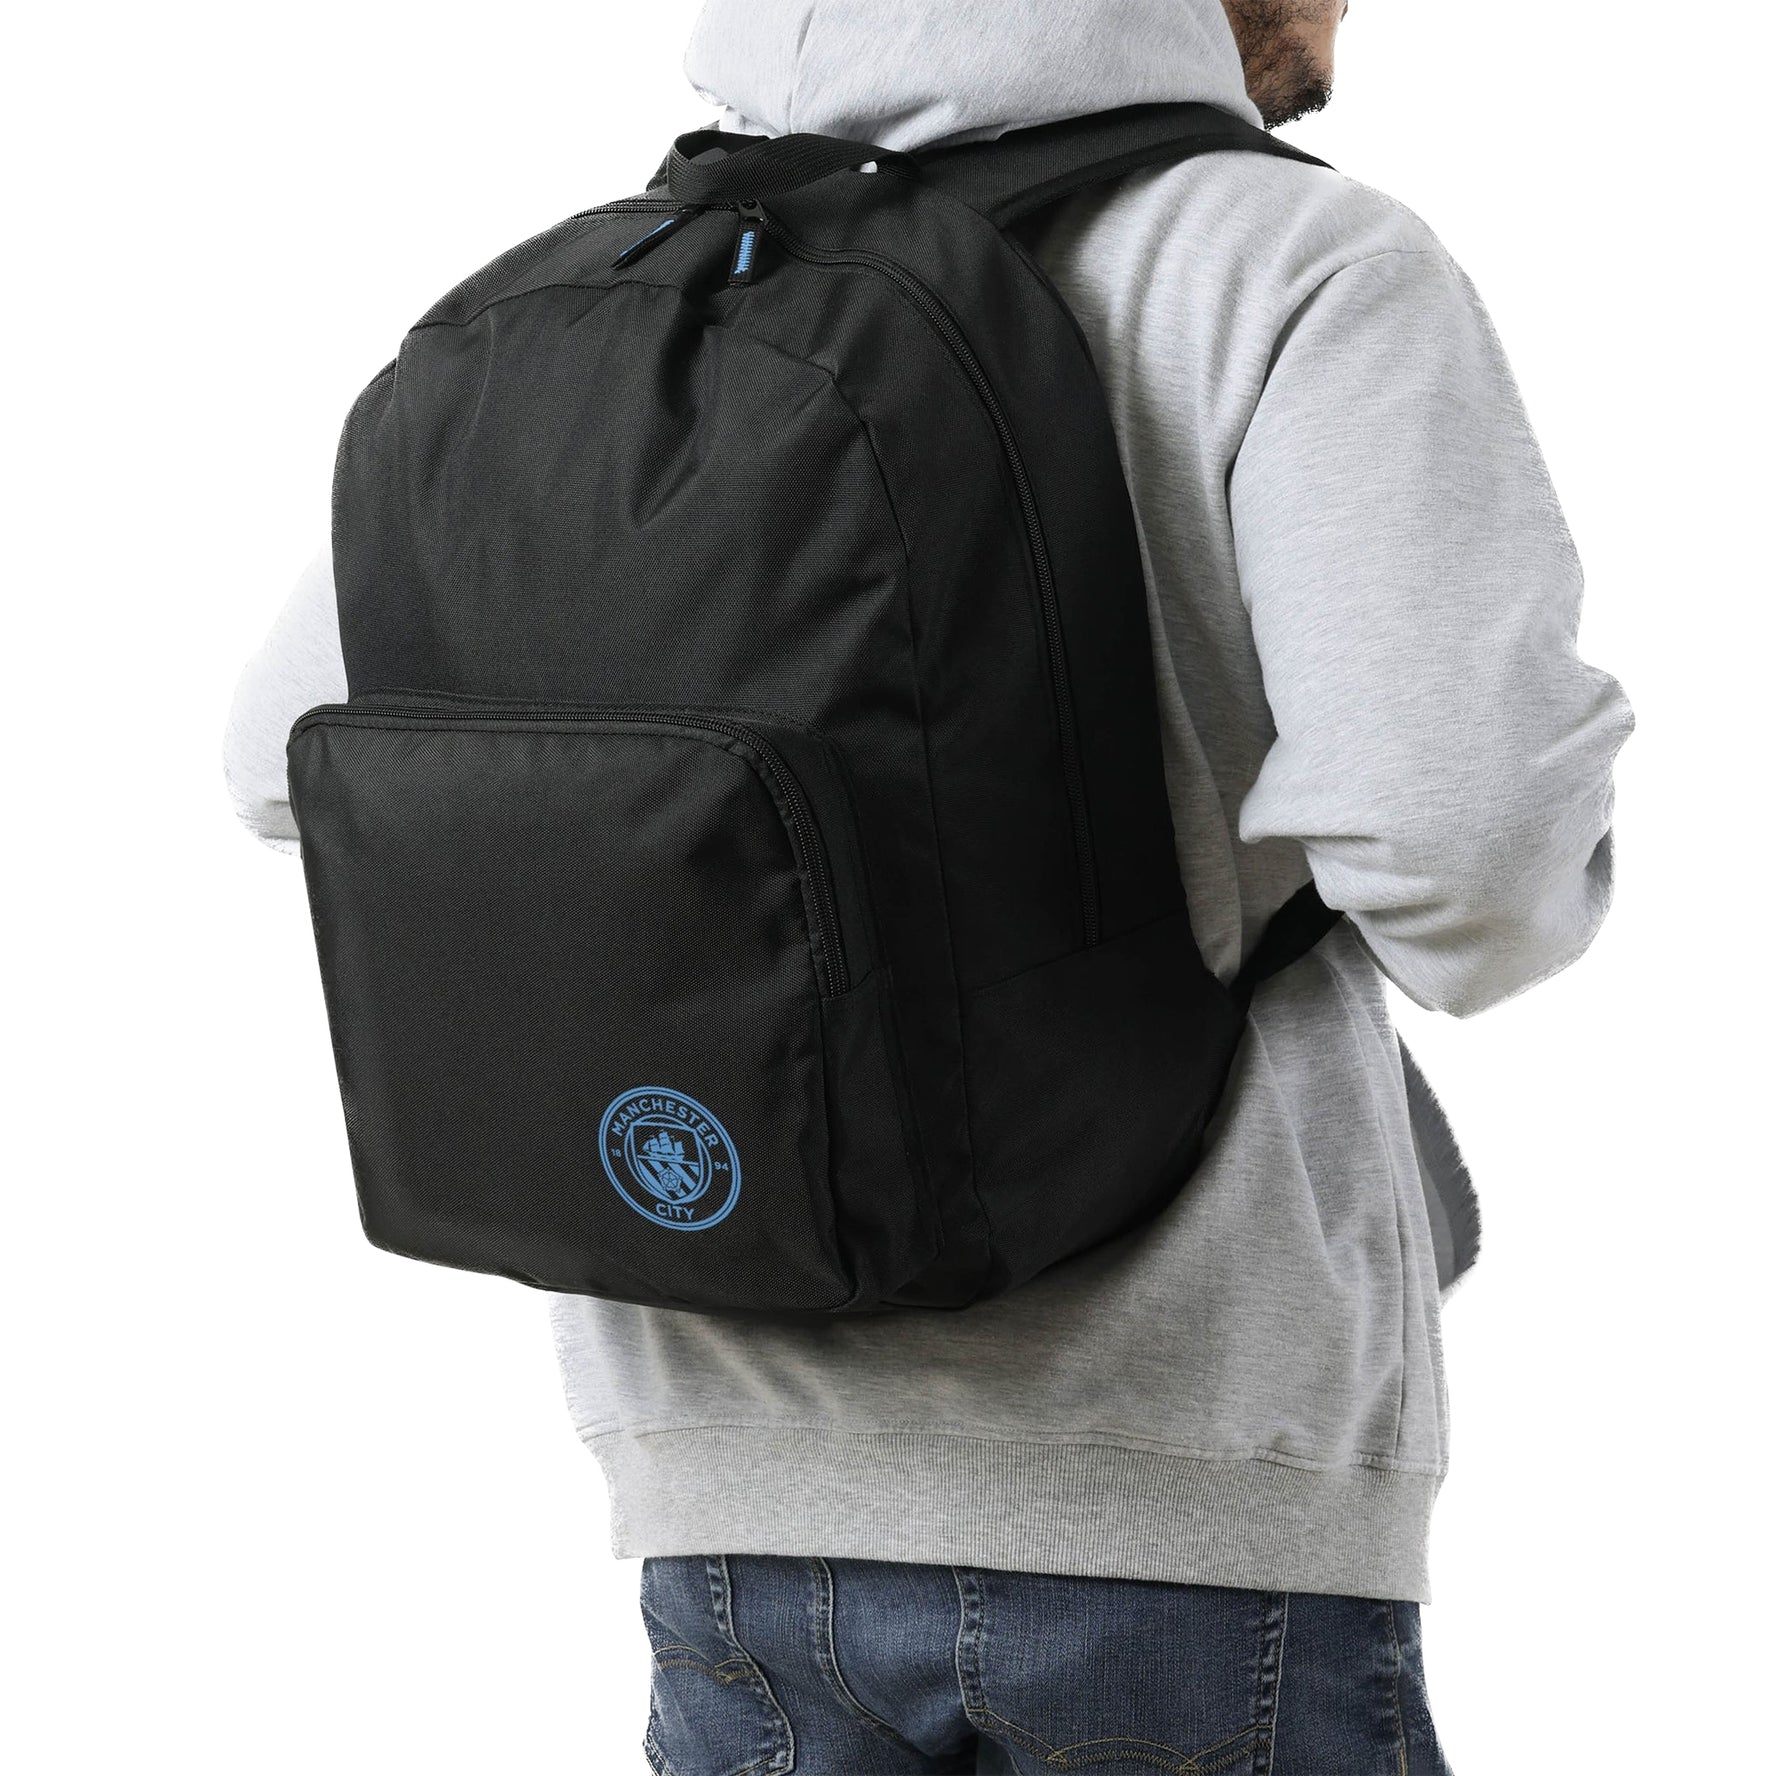 Recycled Classic Football Backpack-Backpack-Football Backpacks-Manchester City FC-SchoolBagsAndStuff